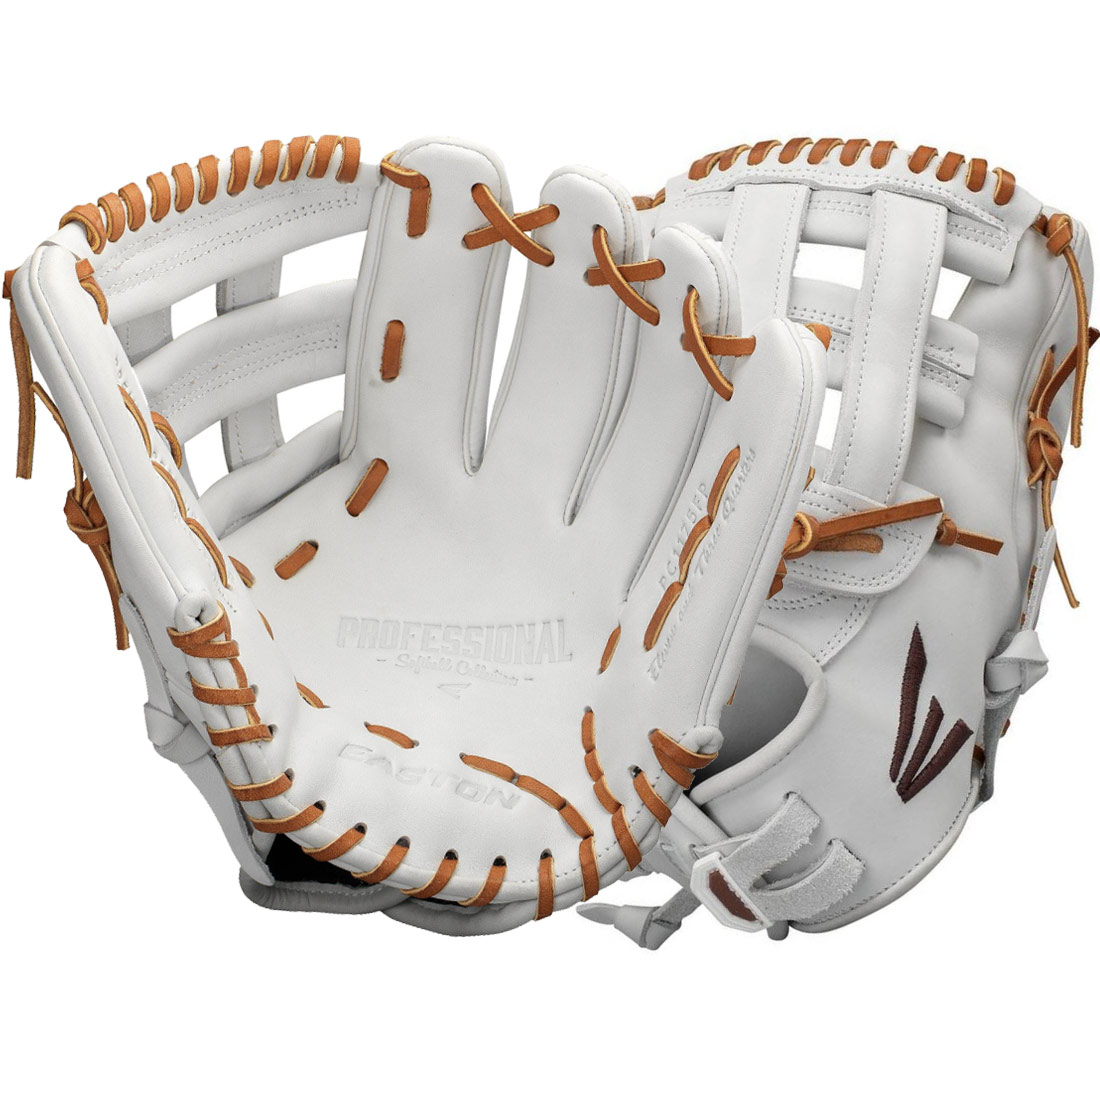 Easton Pro Collection Fastpitch Softball Glove 12.75\" PC1276FP